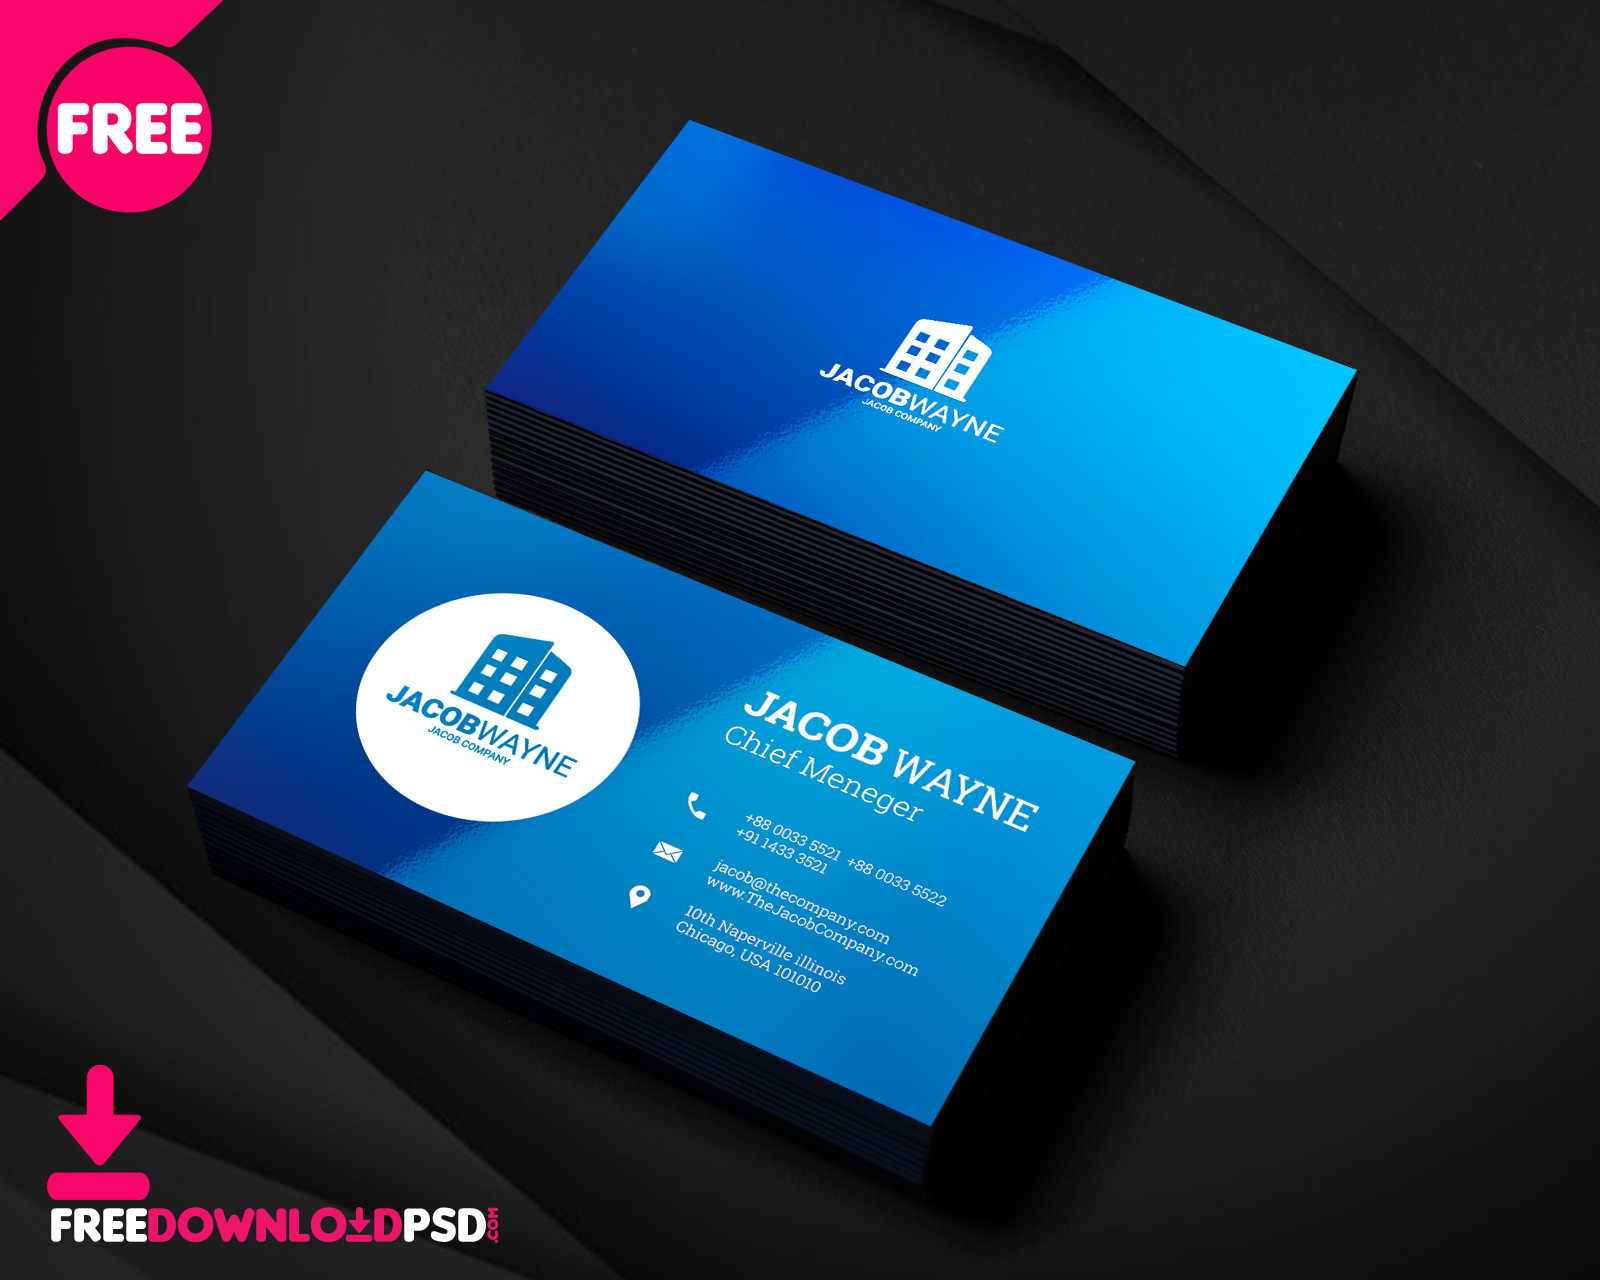 Real Estate Business Card Psd | Freedownloadpsd Within Psd Visiting Card Templates